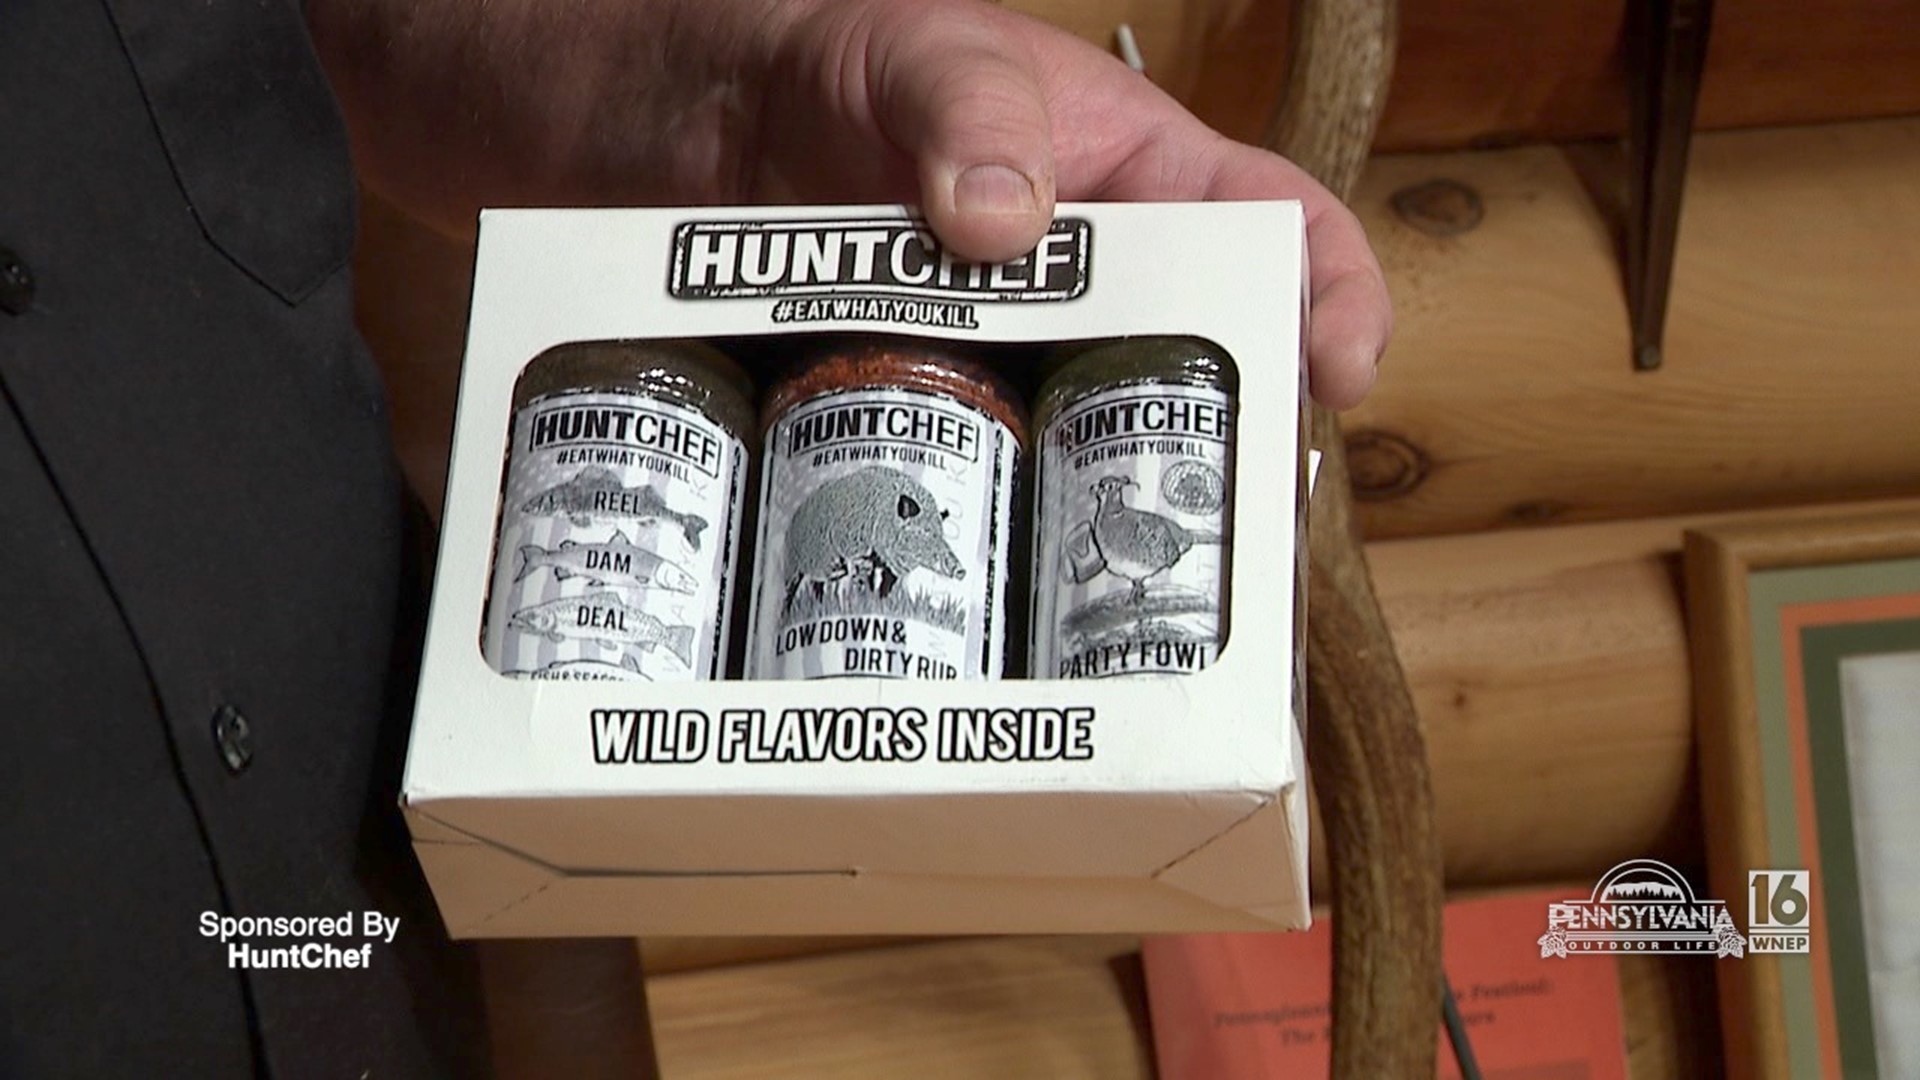 Wild game seasonings guaranteed to make your recipes mouth watering.